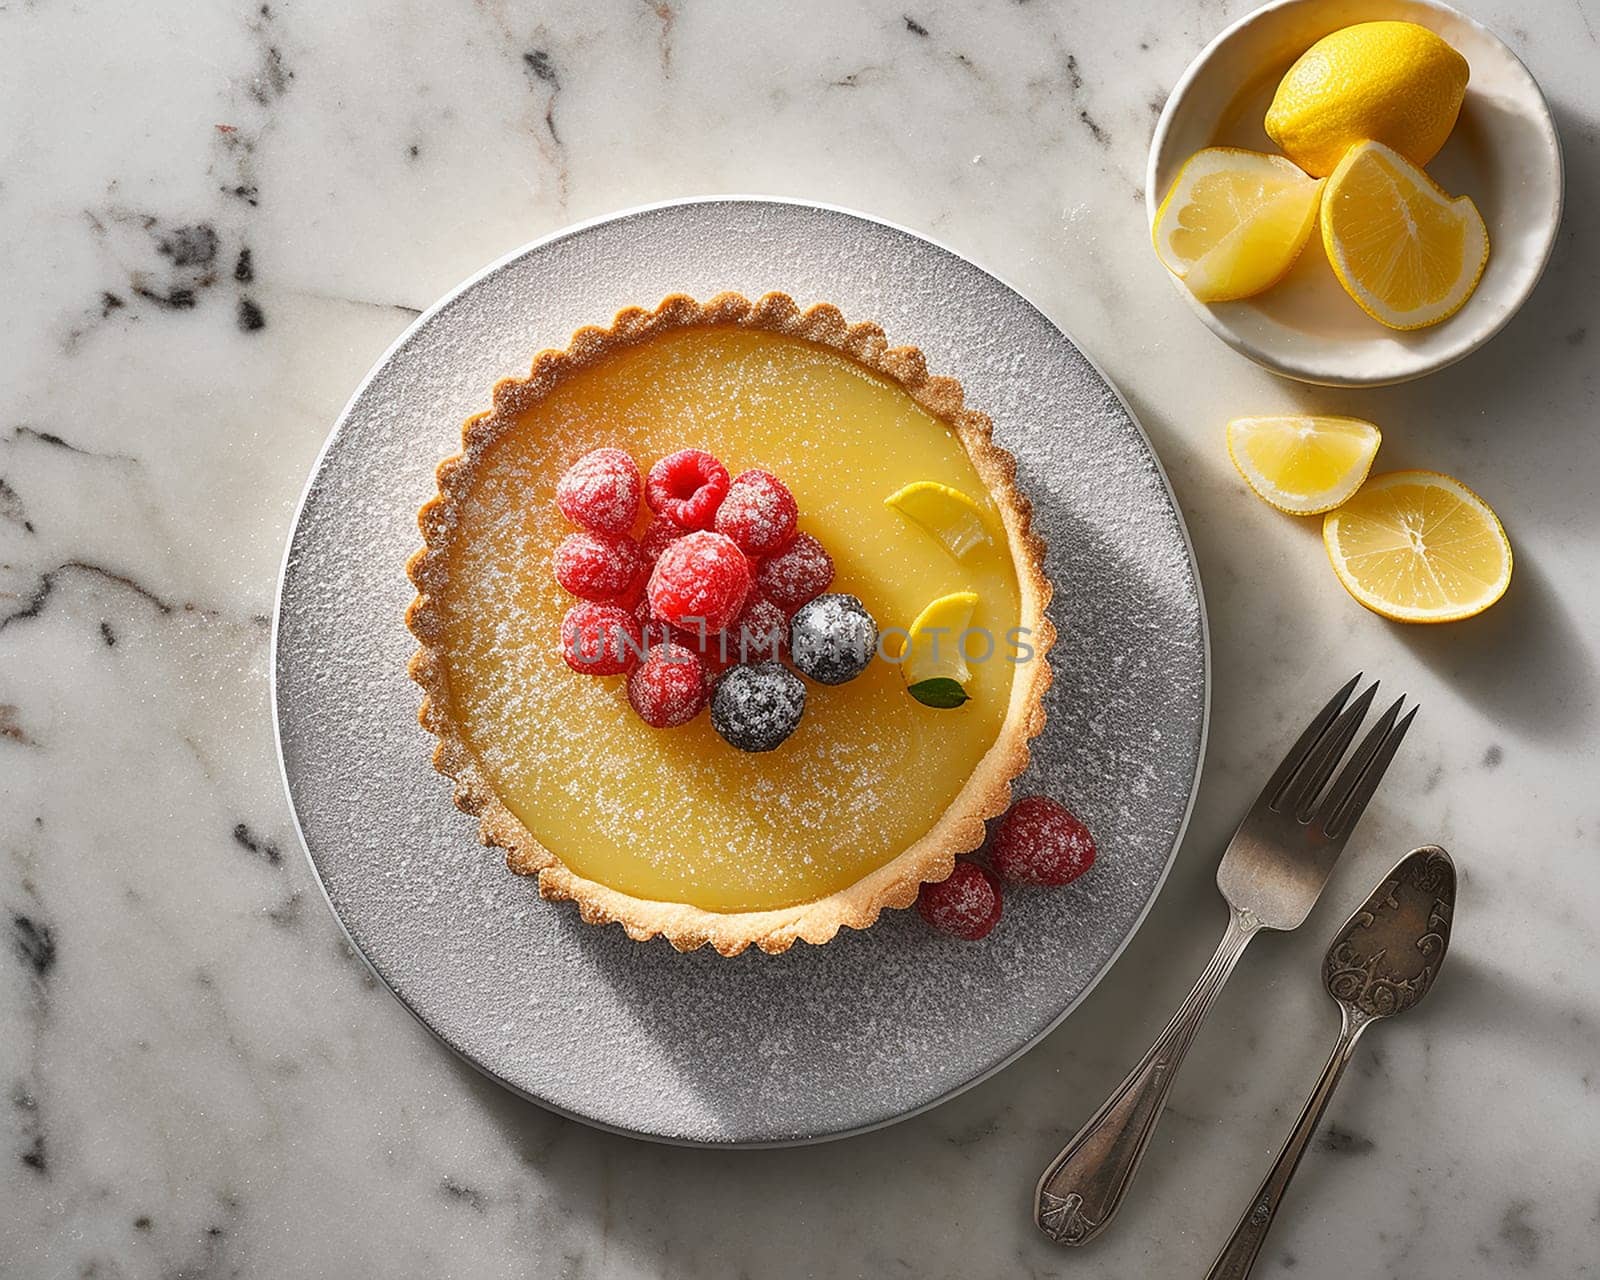 Citrus tart topped with fresh raspberries and dusted with powdered sugar on marble surface. by Hype2art